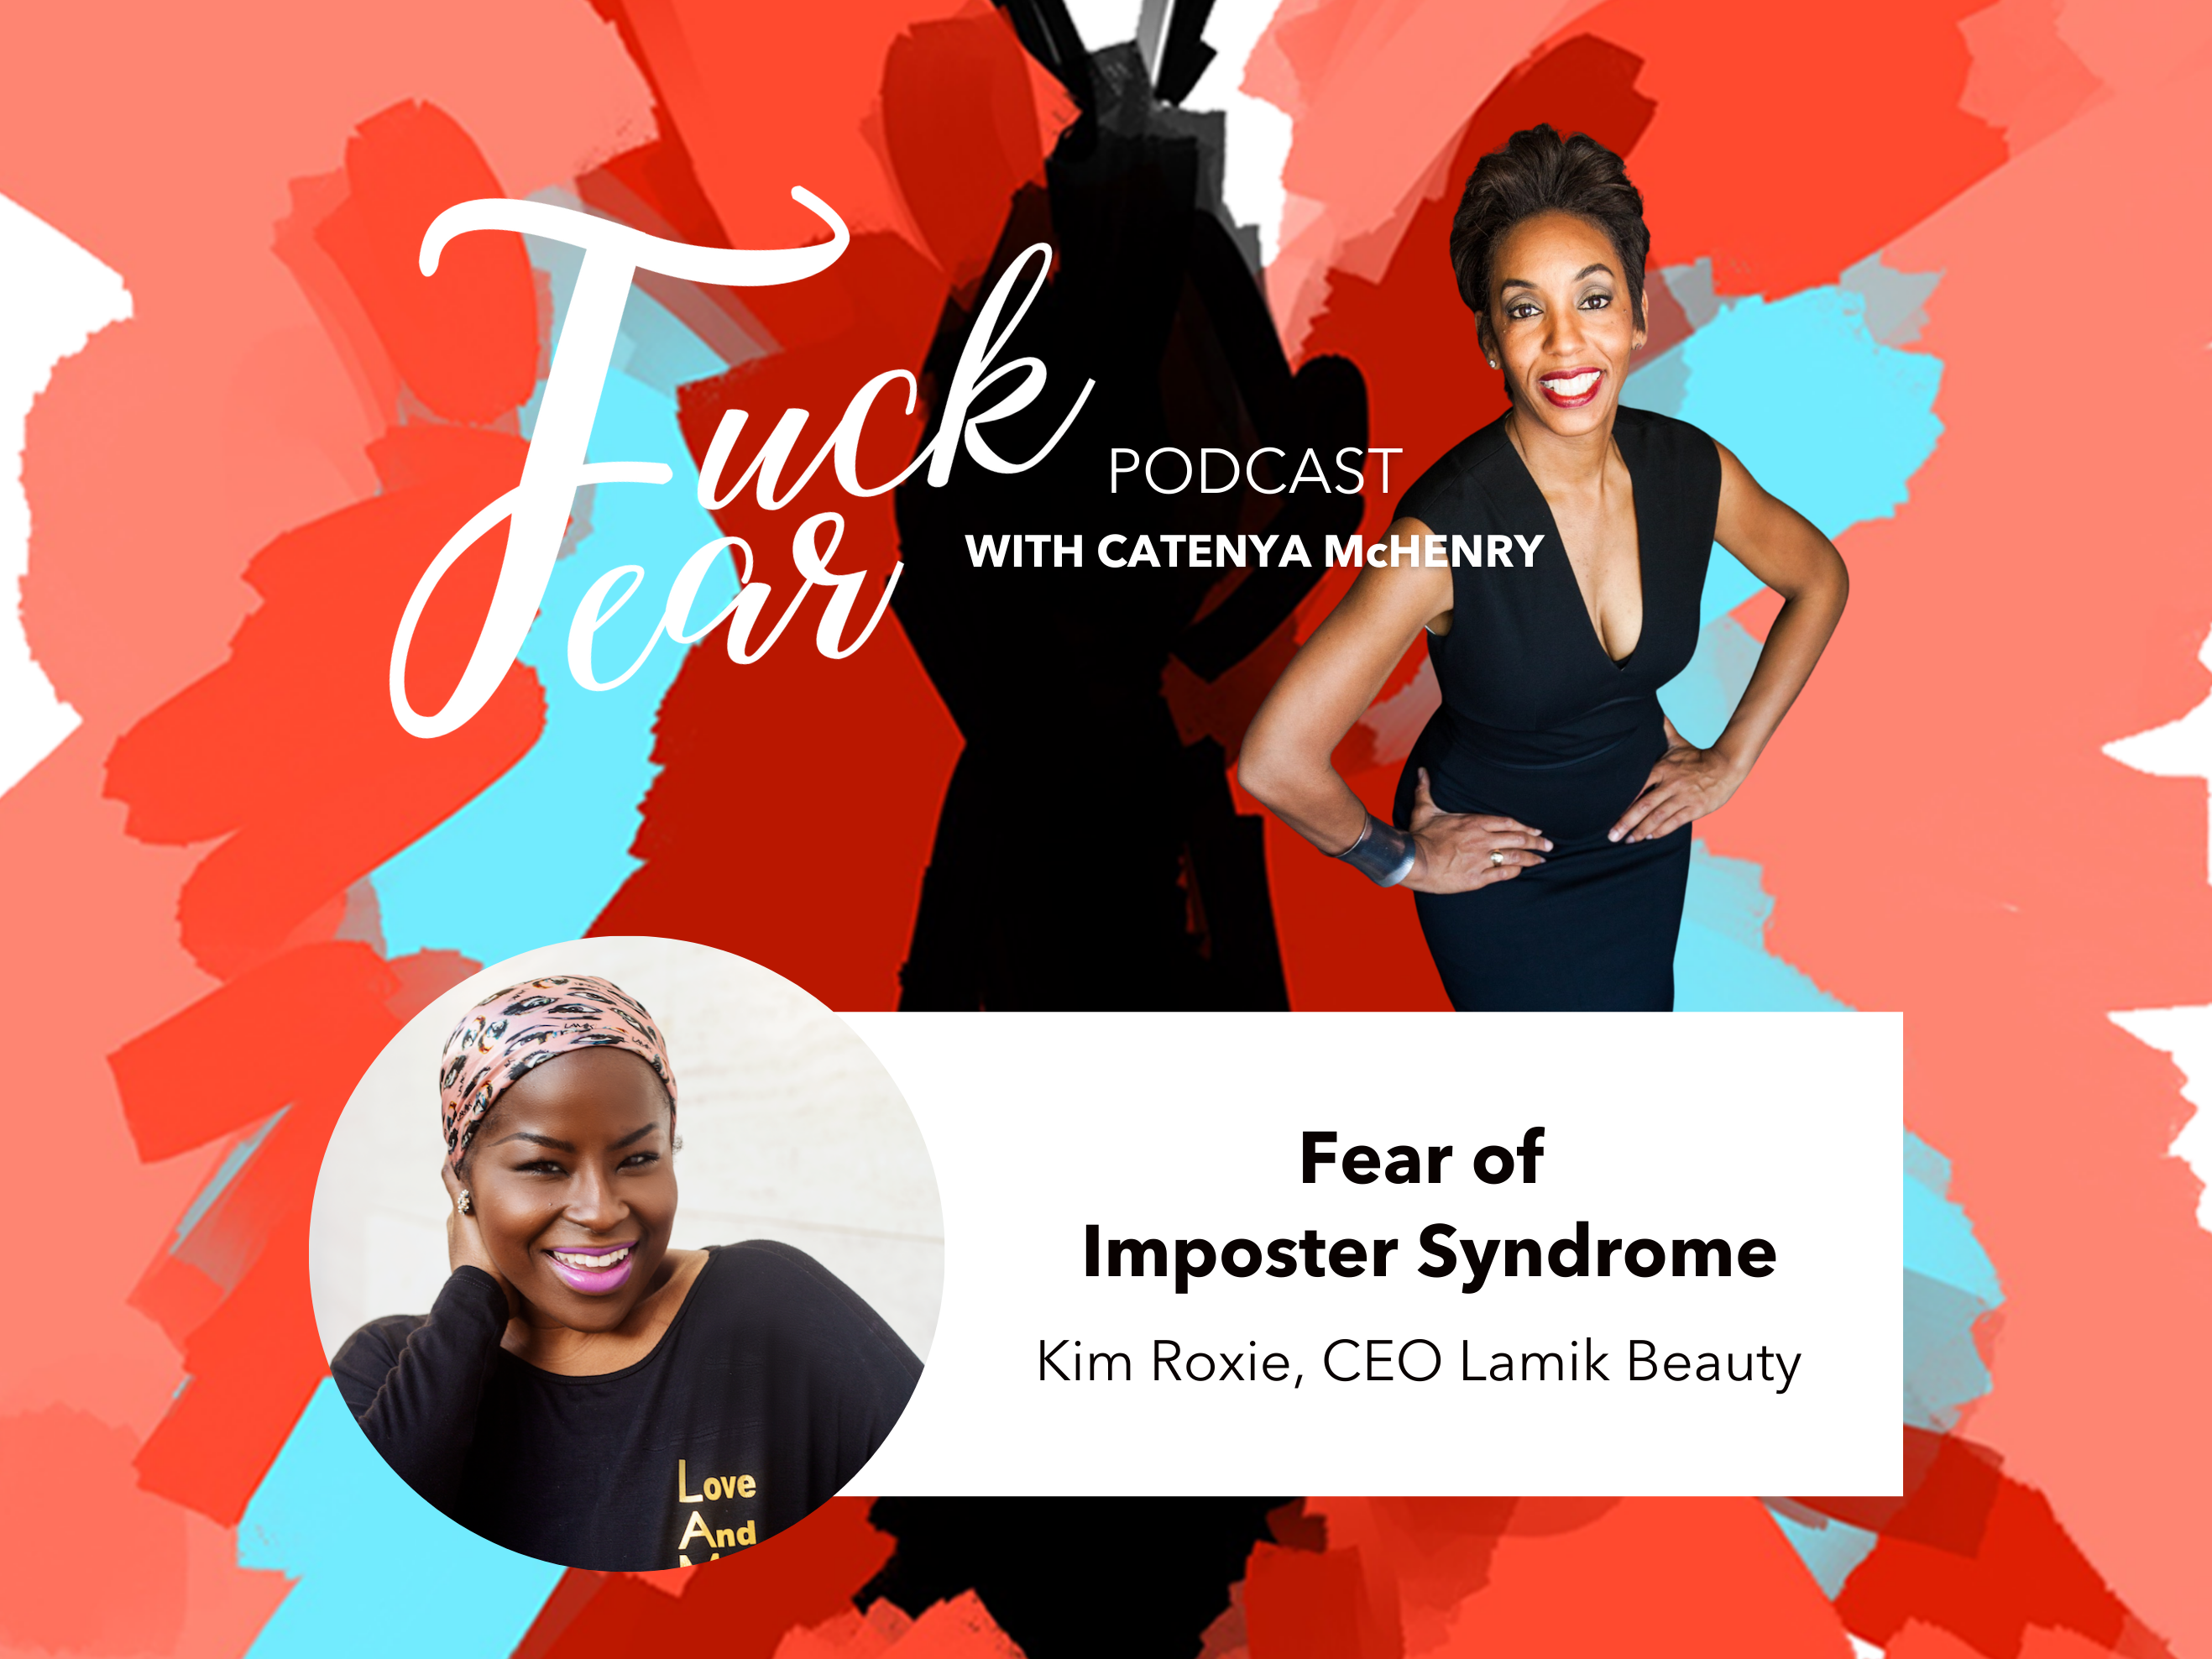 Catenya McHenry interviews Lamik Beauty owner and CEO Kim Roxie on the Fuck Fear podcast episode Fear of Imposter Syndrome